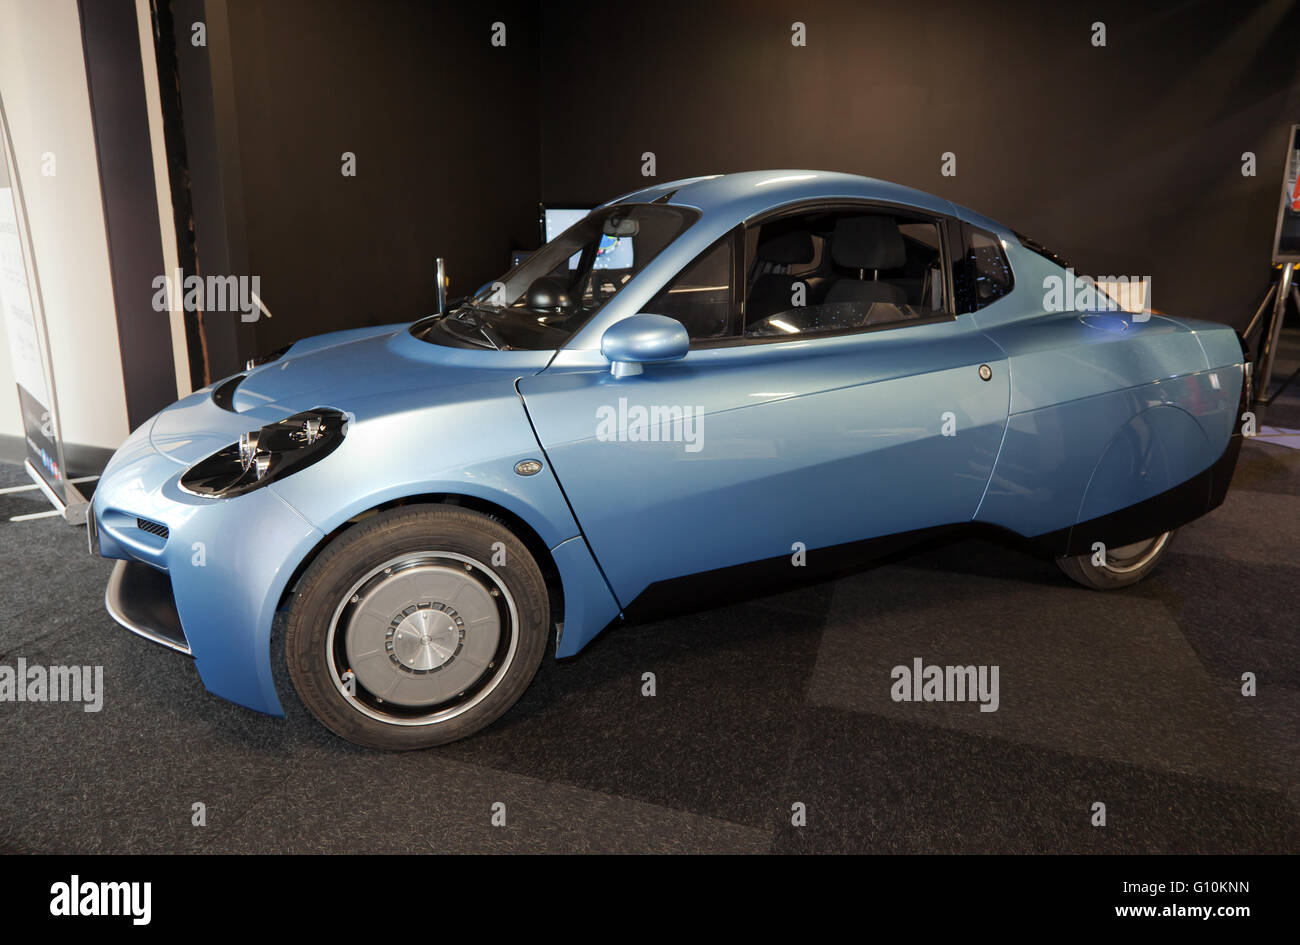 The River Simple RASA Prototype, a small hydrogen-powered fuel cell electric vehicle, on display at the London Motor Show 2016 Stock Photo